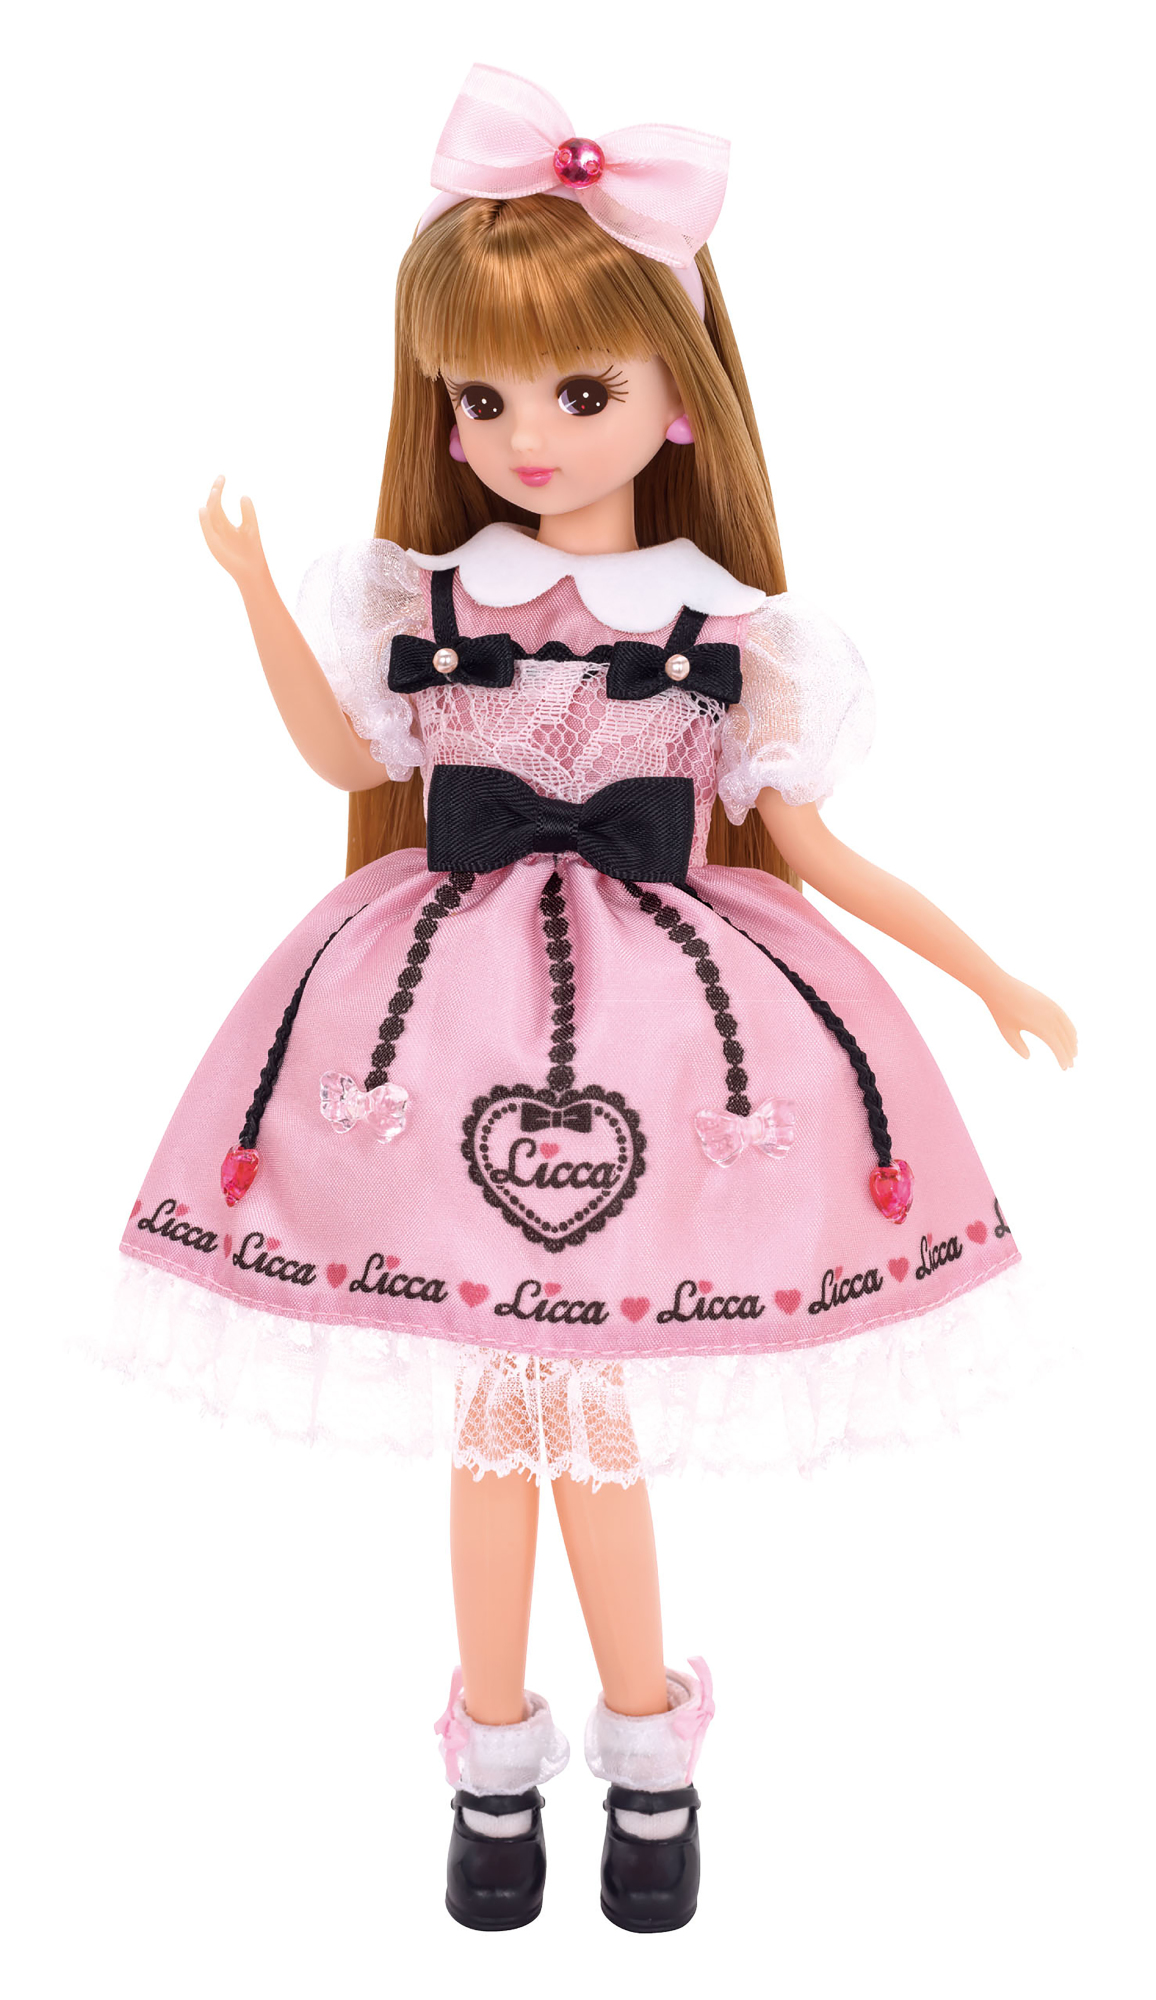 where to buy licca dolls